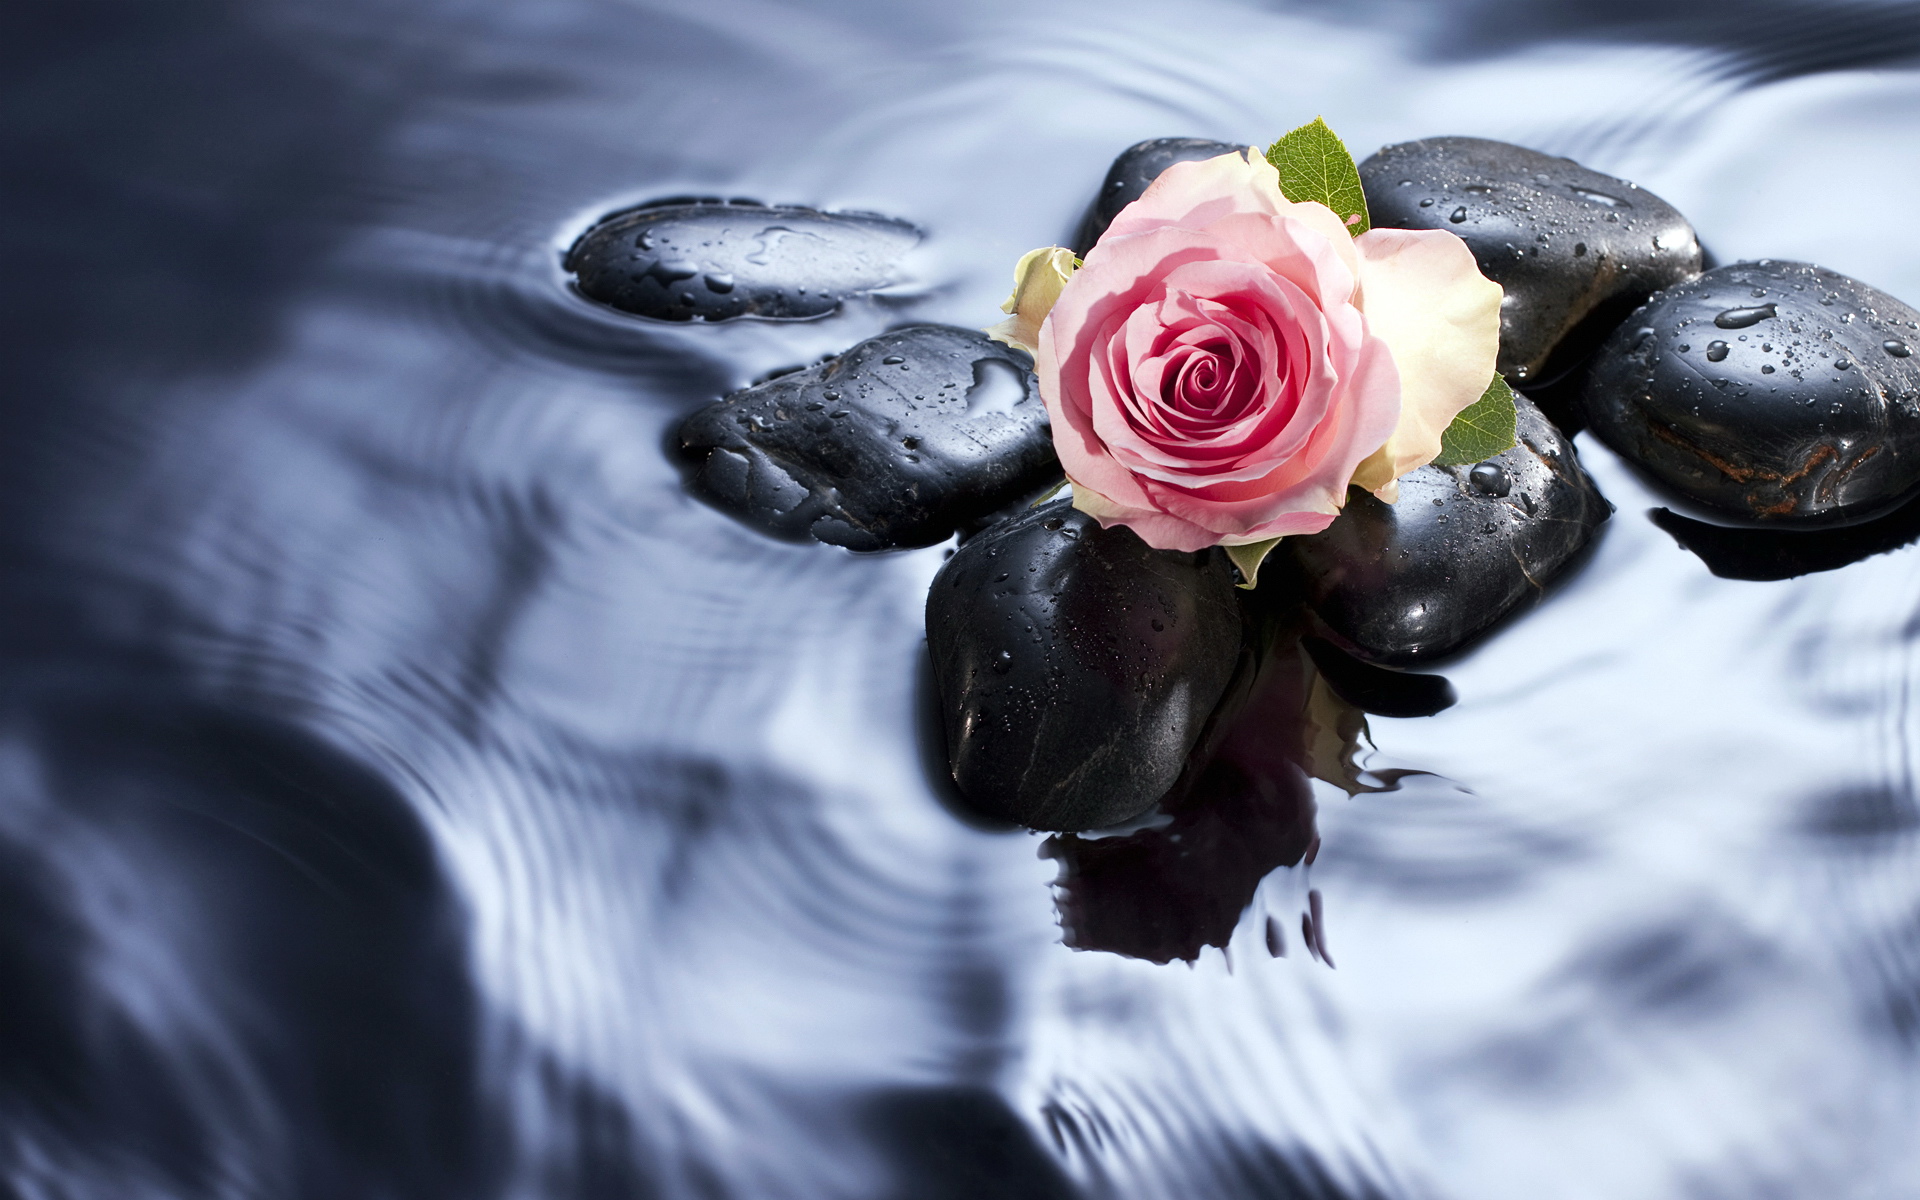 Wallpaper Full HD photography, artistic, bud, rose, stone, water